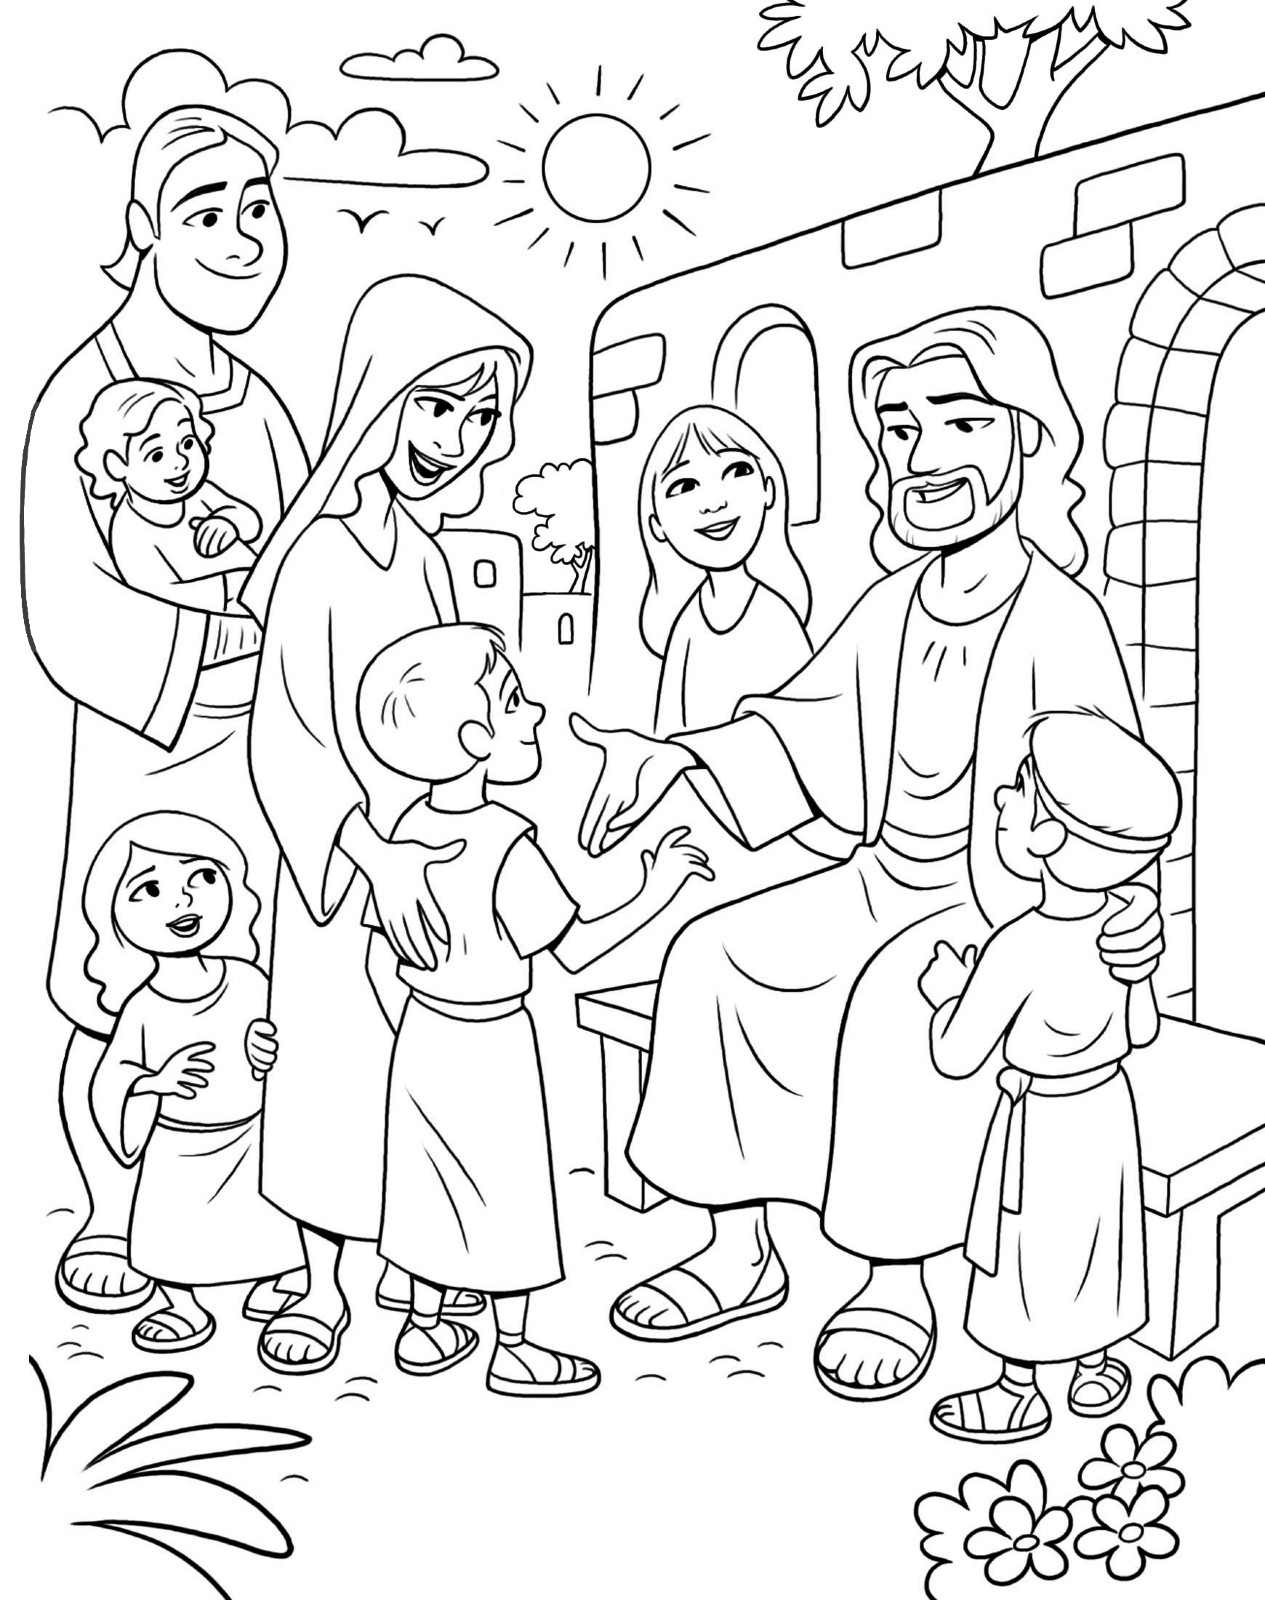 Jesus Loves Children Coloring Page
 Christ Meeting the Children